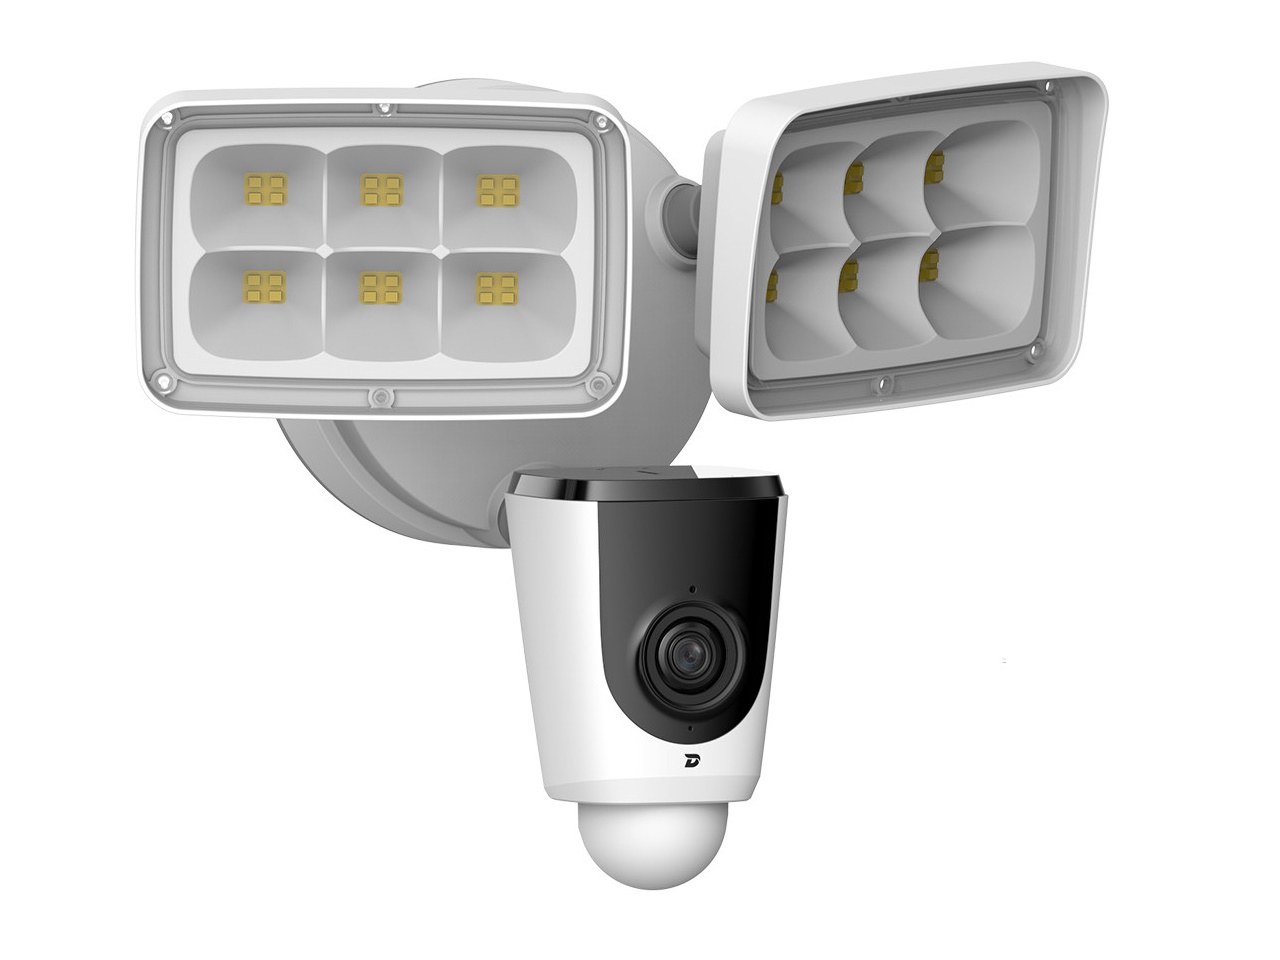 Flooder 2MP WiFi Outdoor Floodlight Camera/2.8mm Lens/33ft Night Vision/12VDC/Built-In Microphone and Speaker by ICRealtime